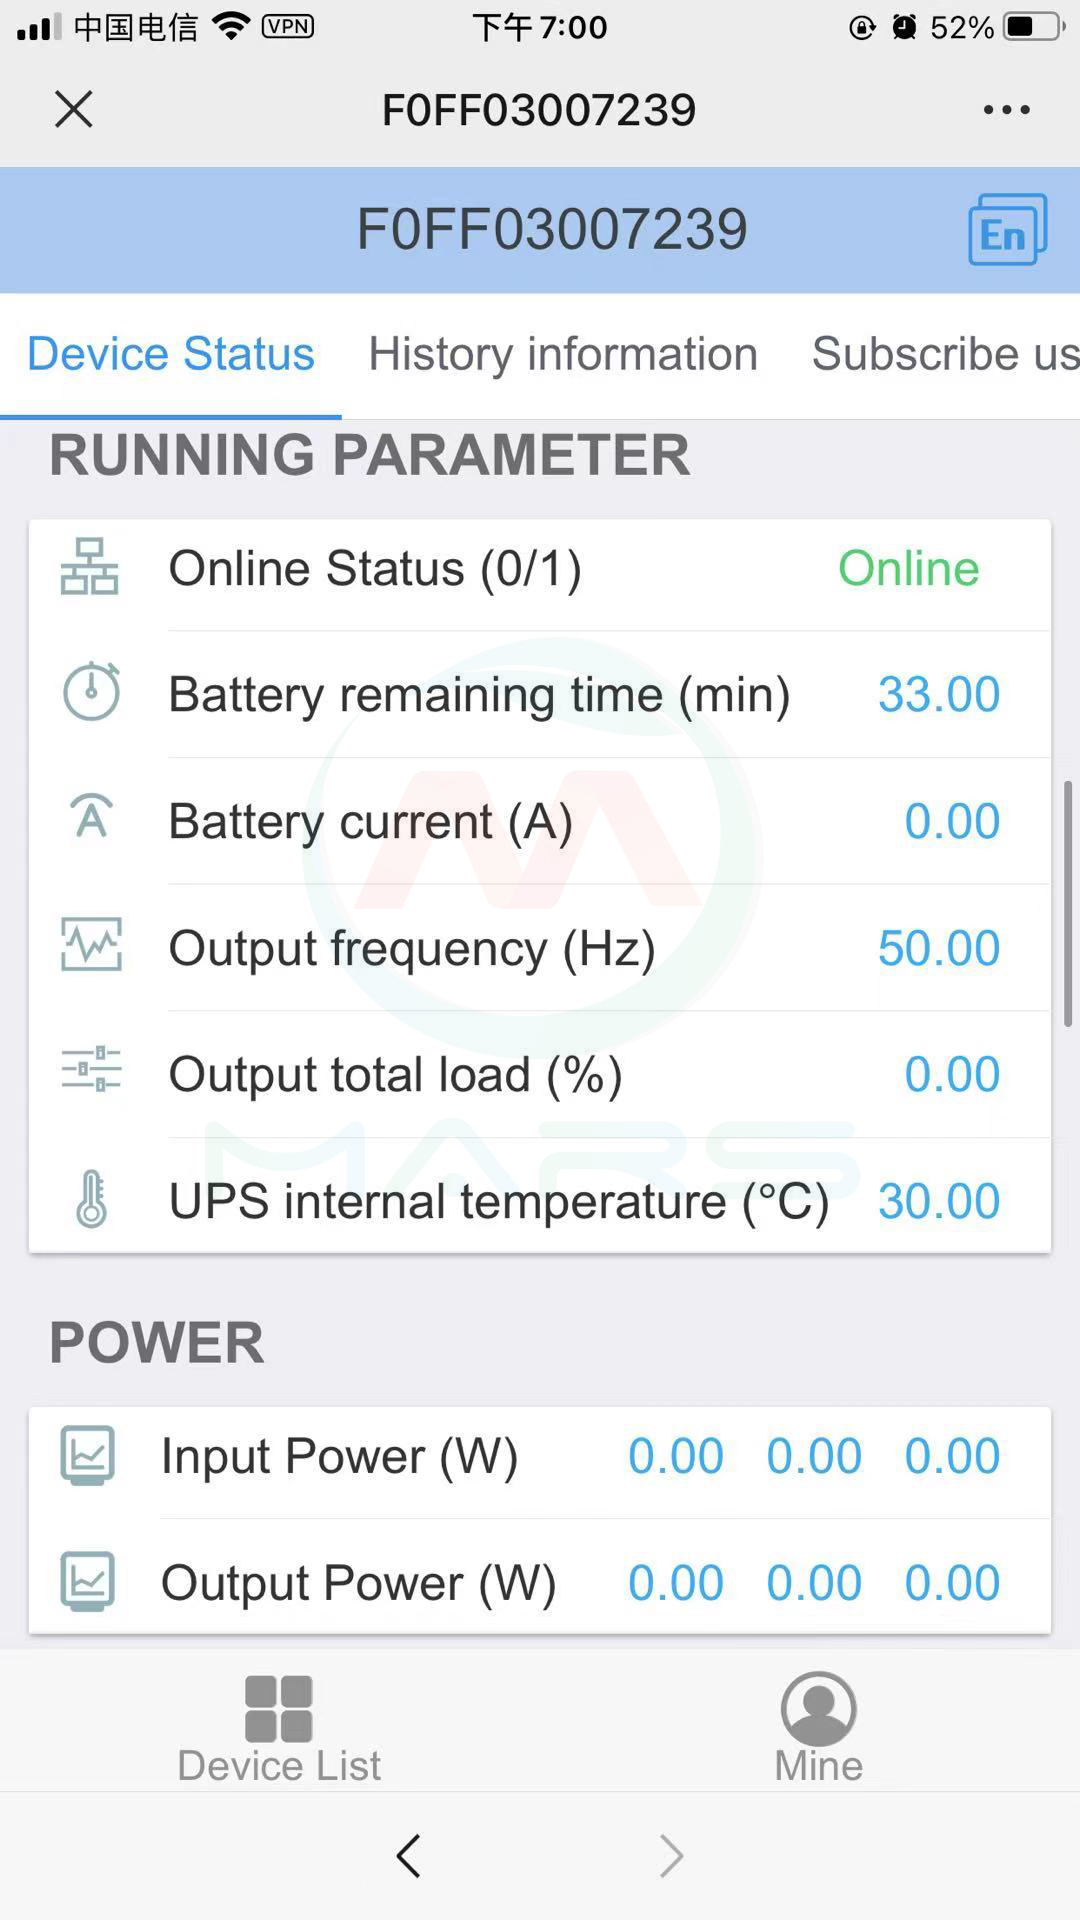 How To Remote Monitor My Household Solar System?